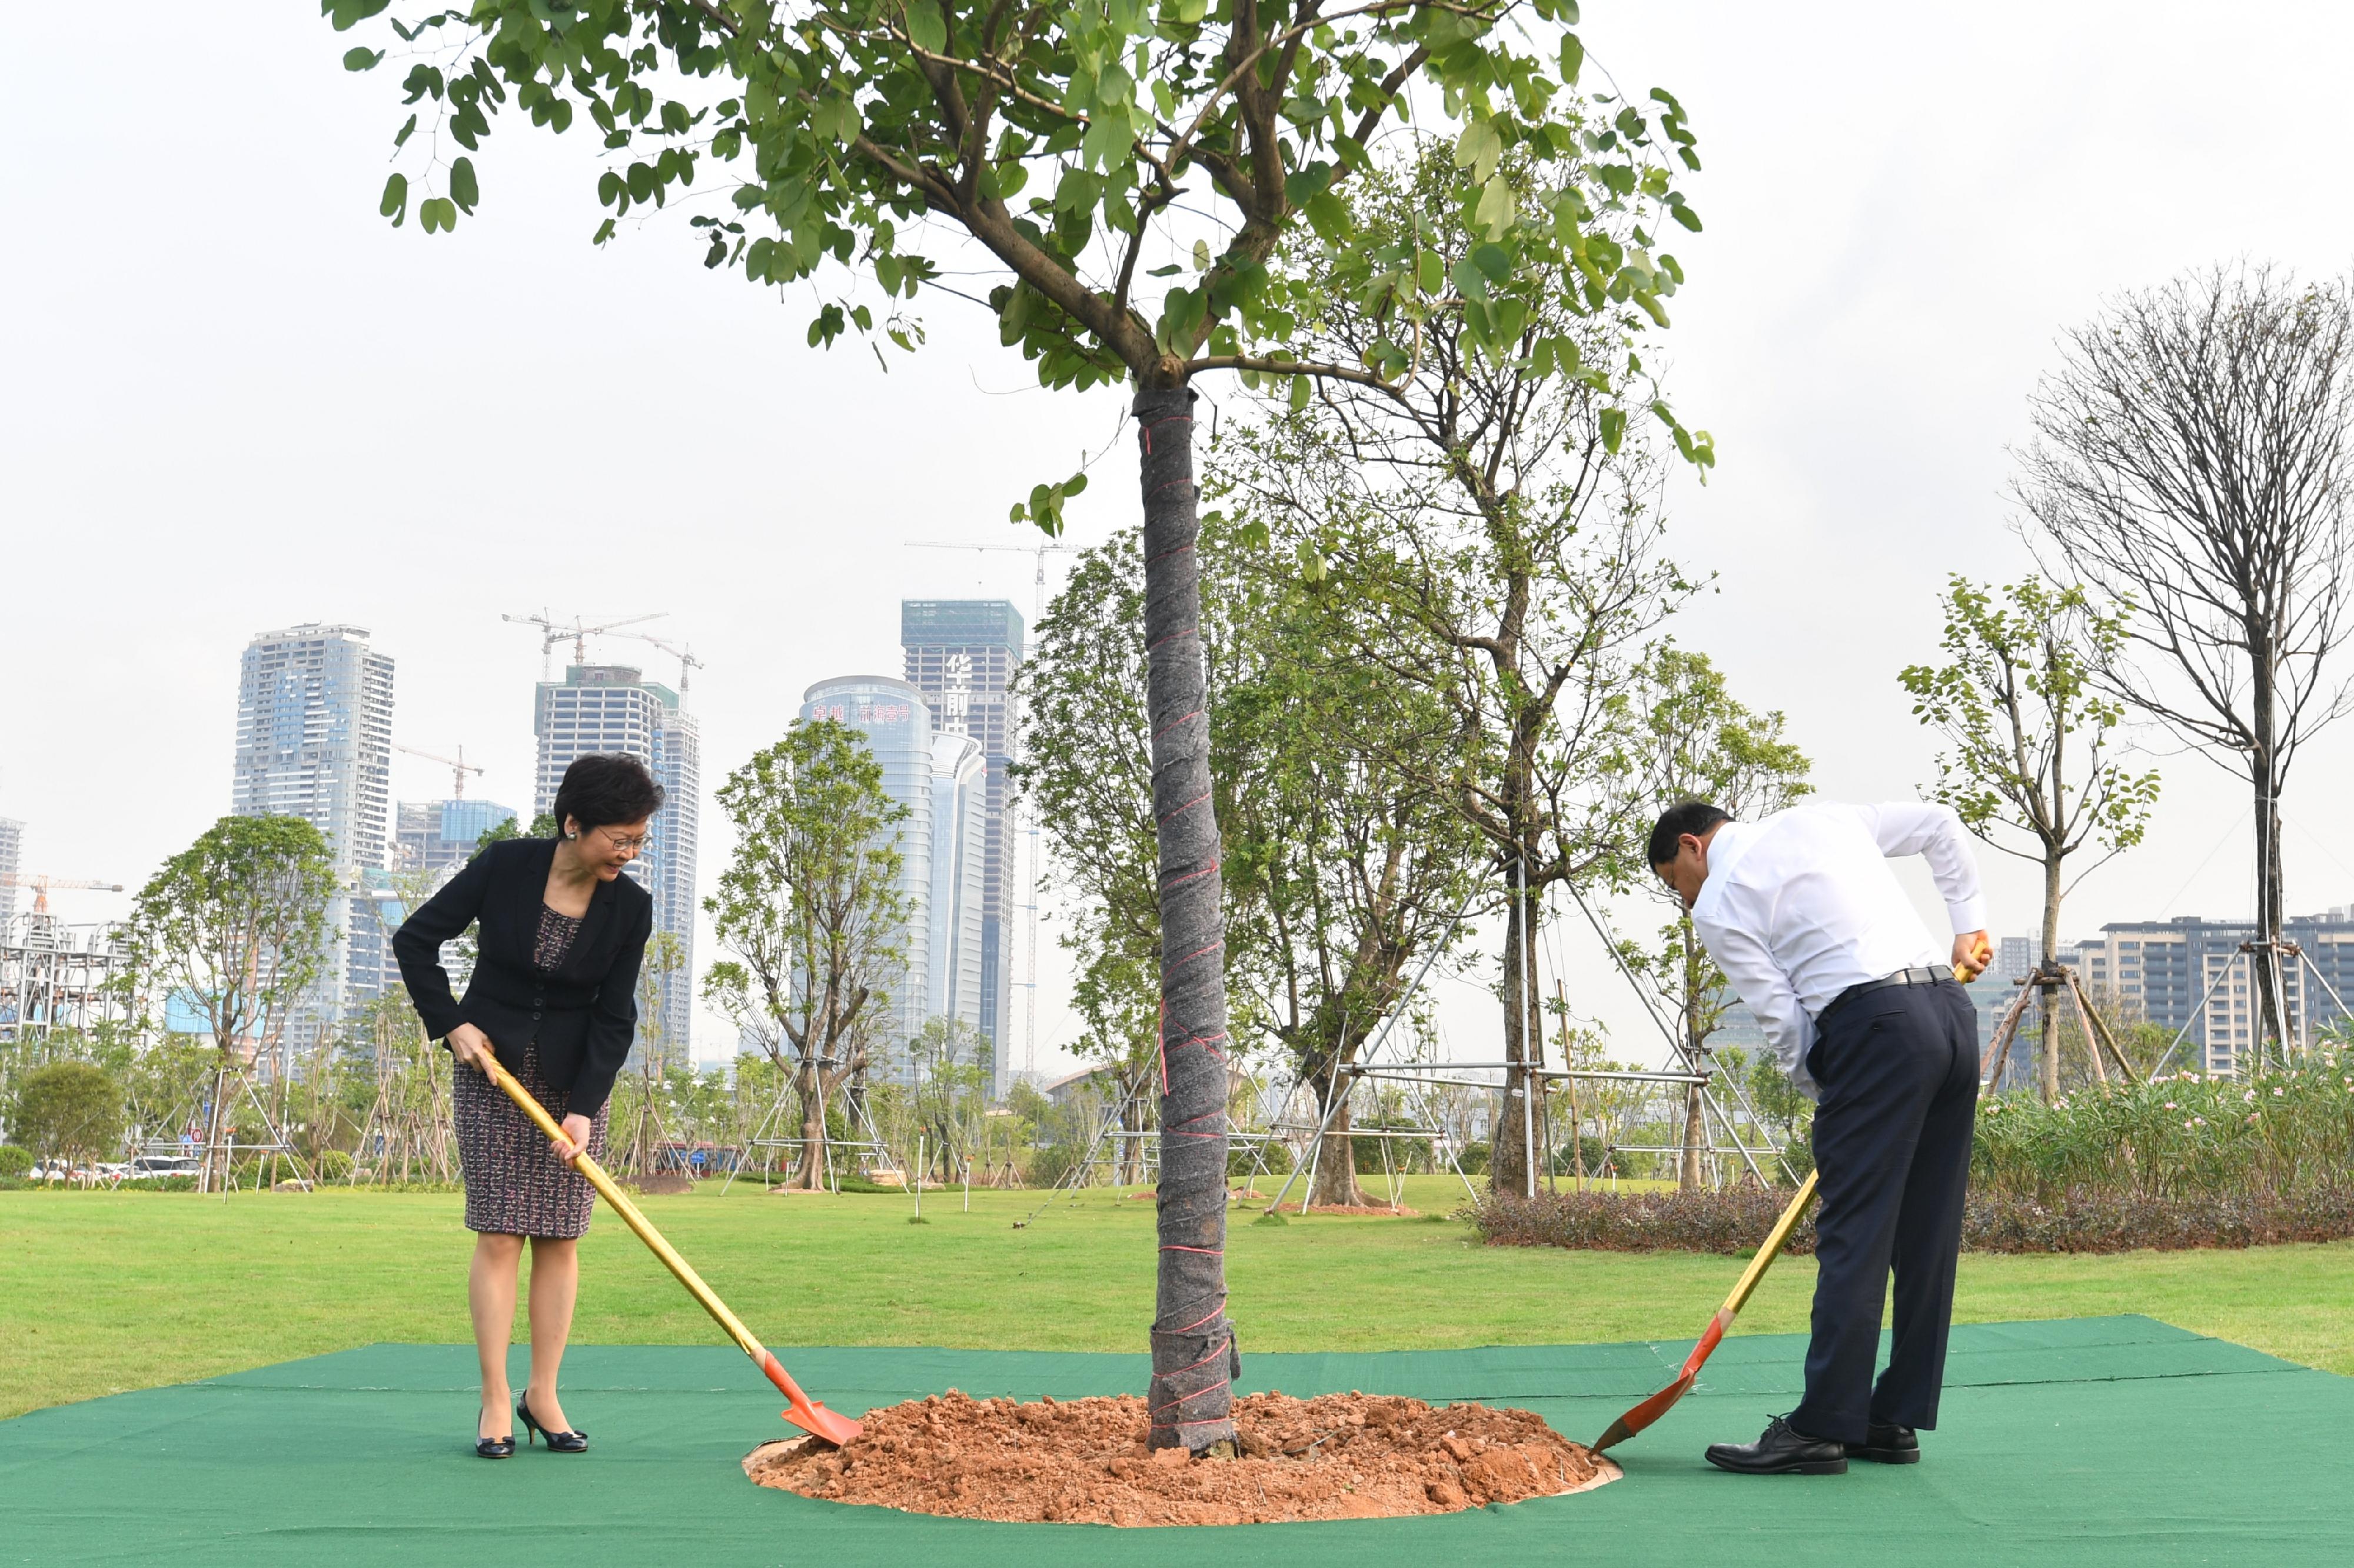 The Chief Executive, Mrs Carrie Lam, and the then Secretary of the CPC Shenzhen Municipal Committee, Mr Wang Weizhong, planted trees together at Qianhai Bauhinia Park in Shenzhen on August 31, 2017.